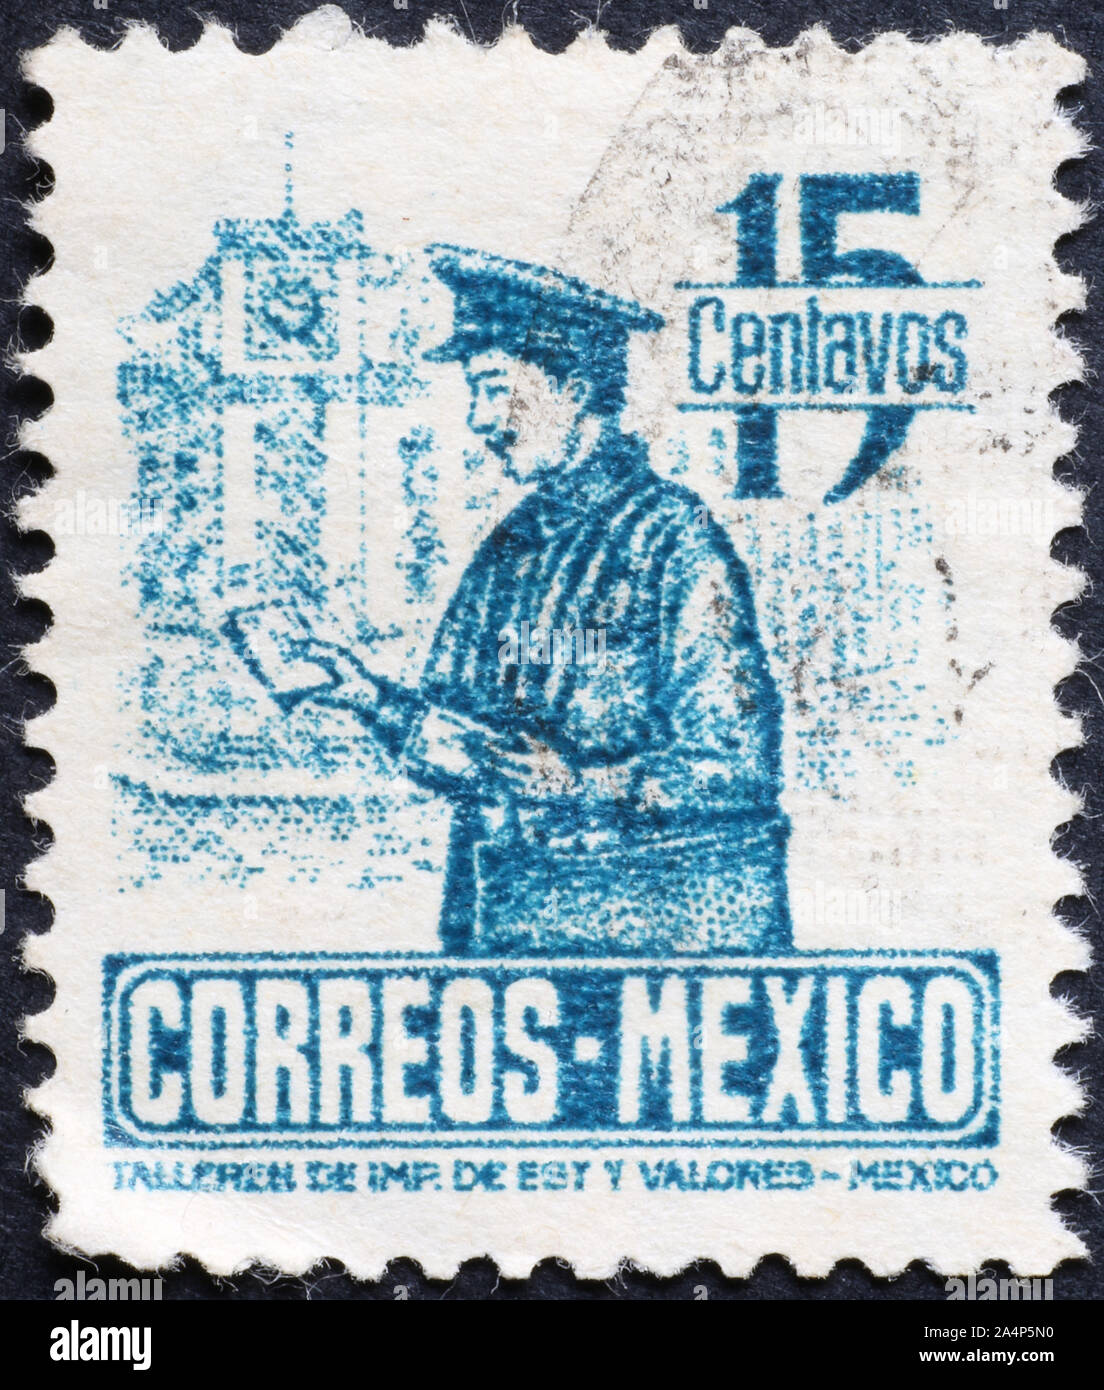 Mexican mailman on vintage postage stamp Stock Photo